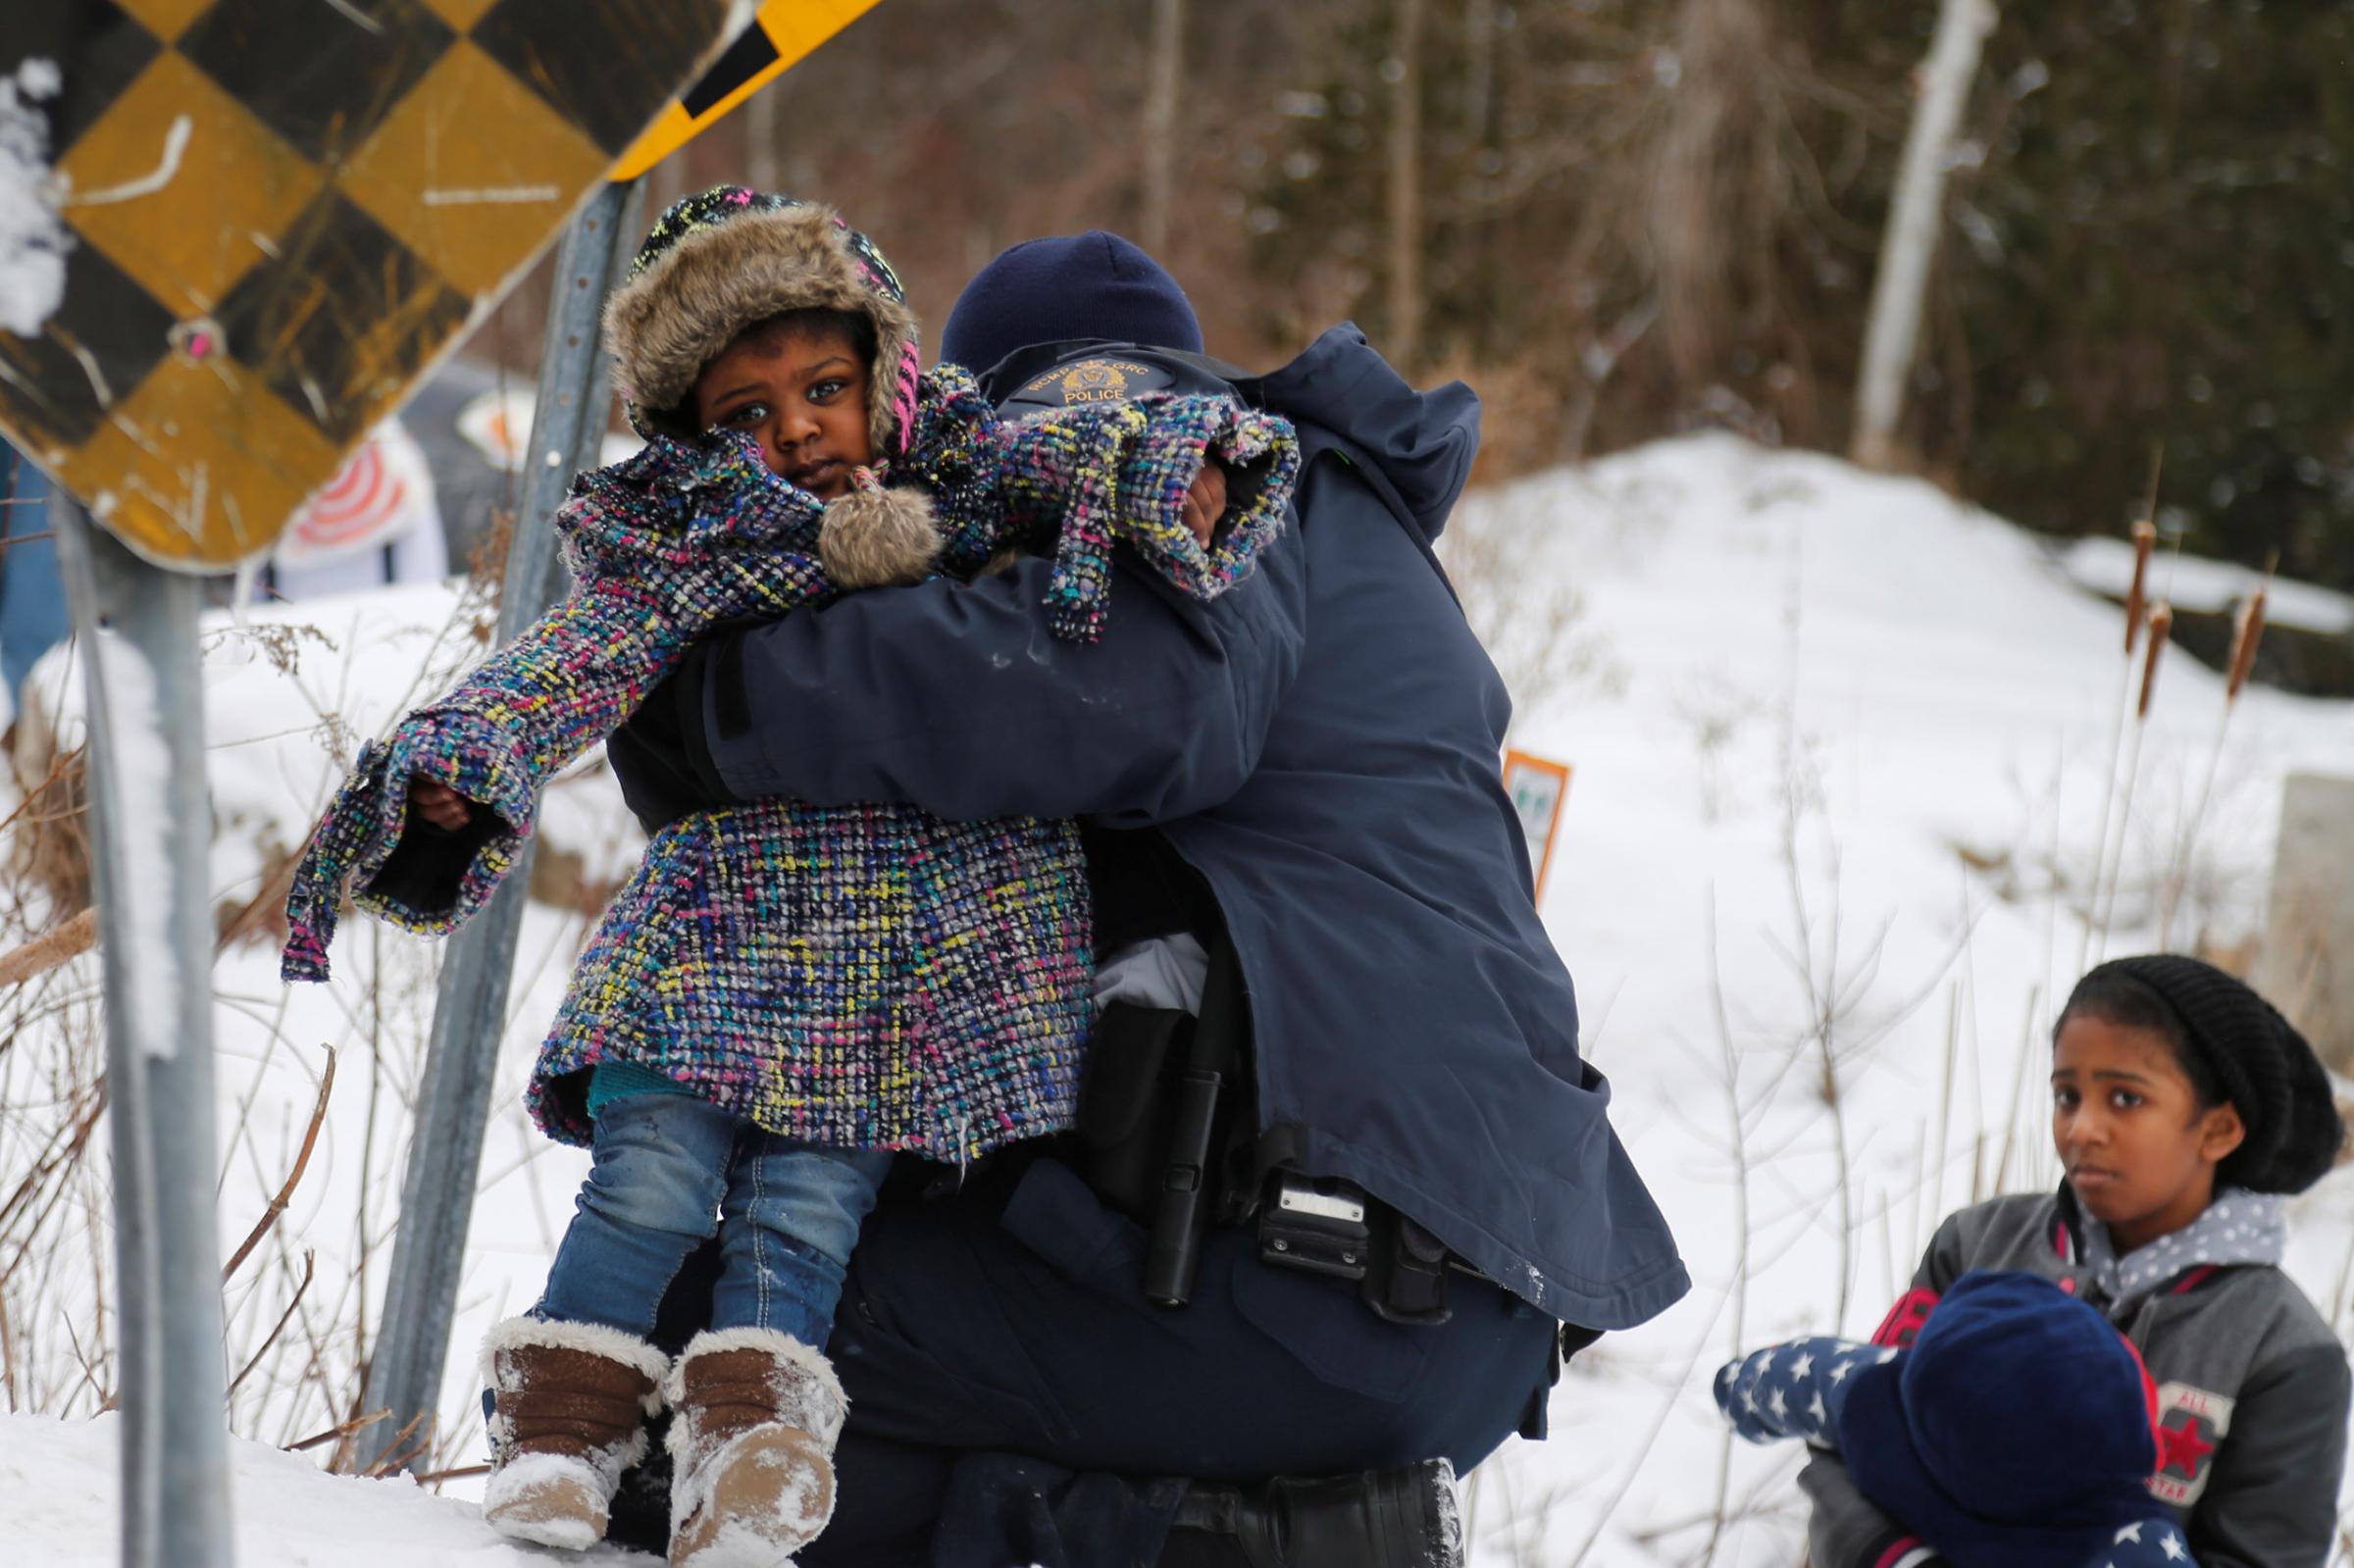 A child is helped up a hill by Royal Canadian Mounted Police officers after a family arriving by taxi and claiming to be from Sudan are taken into custody after walking across the U.S.-Canada border into Hemmingford, Quebec